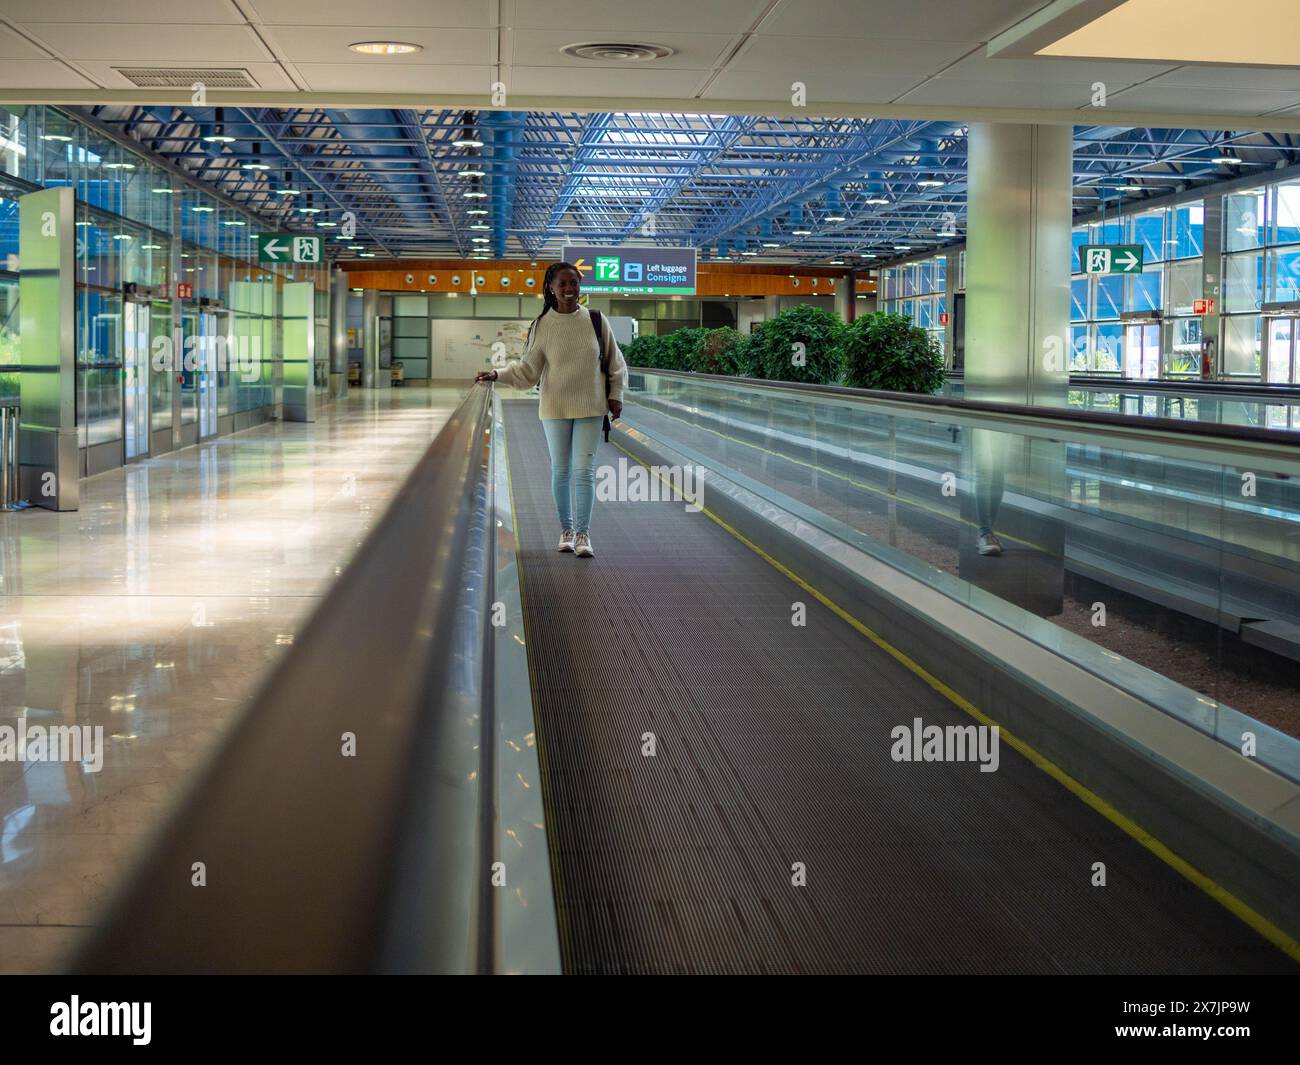 A young woman on a moving walkway inside an airport using her phone Stock Photo